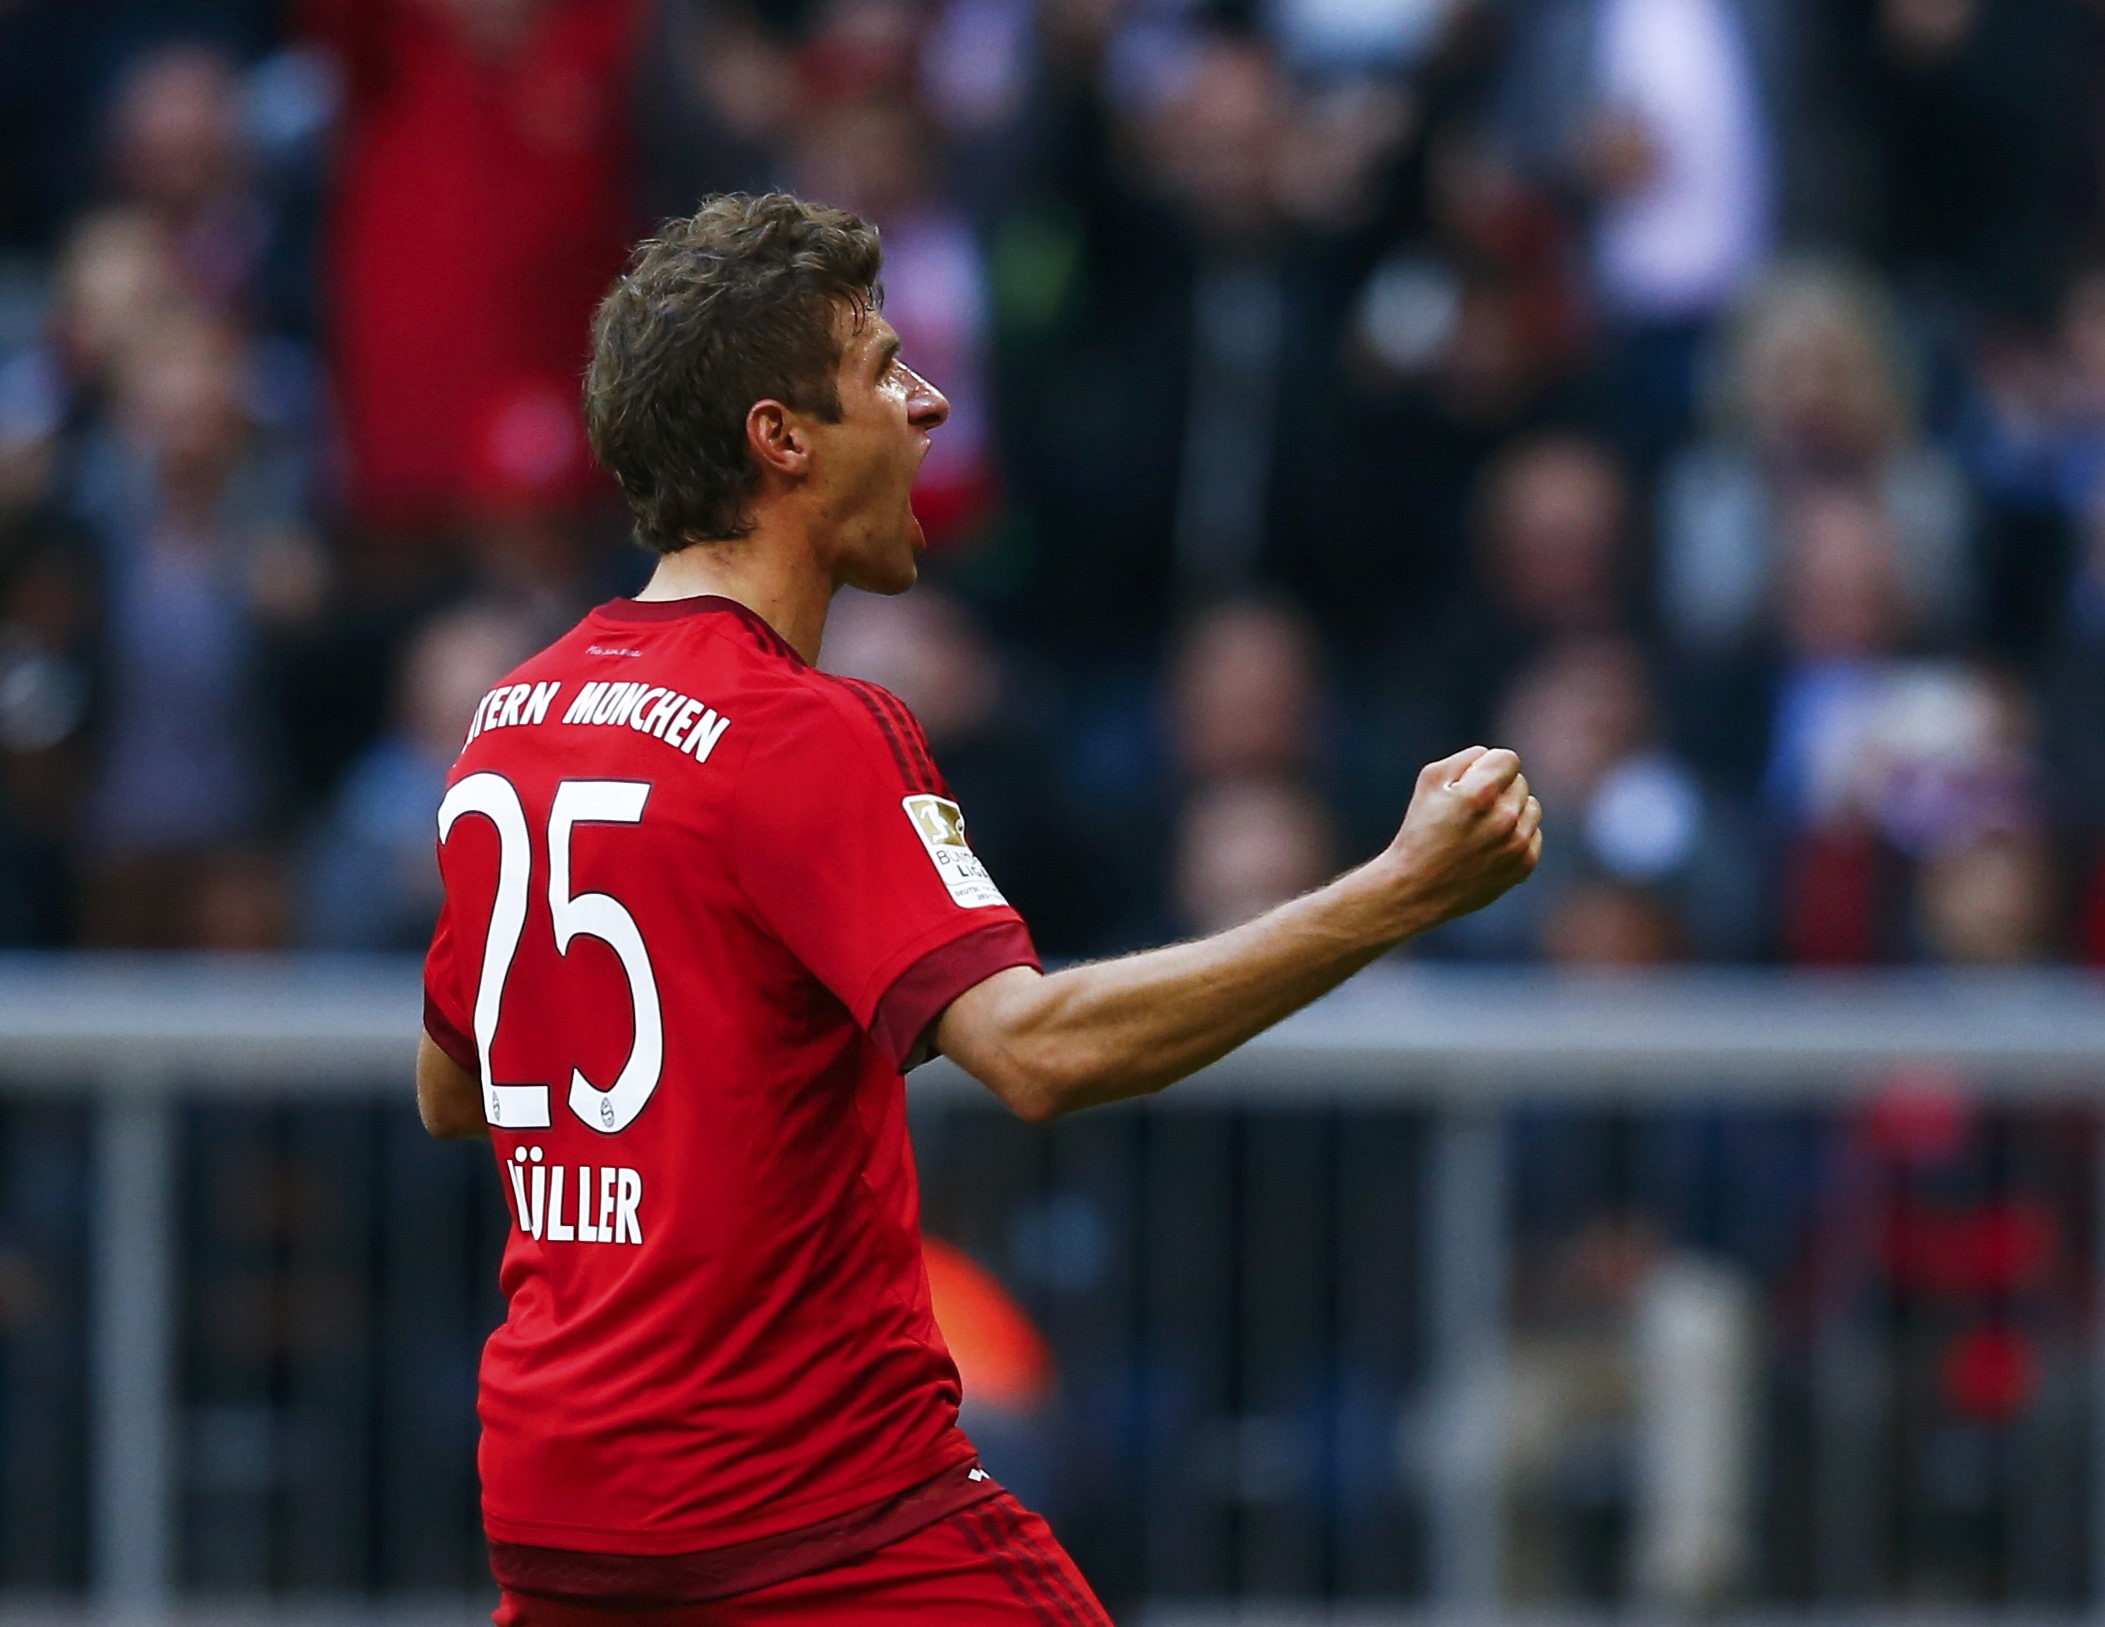 Bayern Munich's Thomas Mueller celebrates after scoring a goal against Borussia Dortmund during their German first division Bundesliga soccer match in Munich, Germany, October 4, 2015. Photo: Reuters